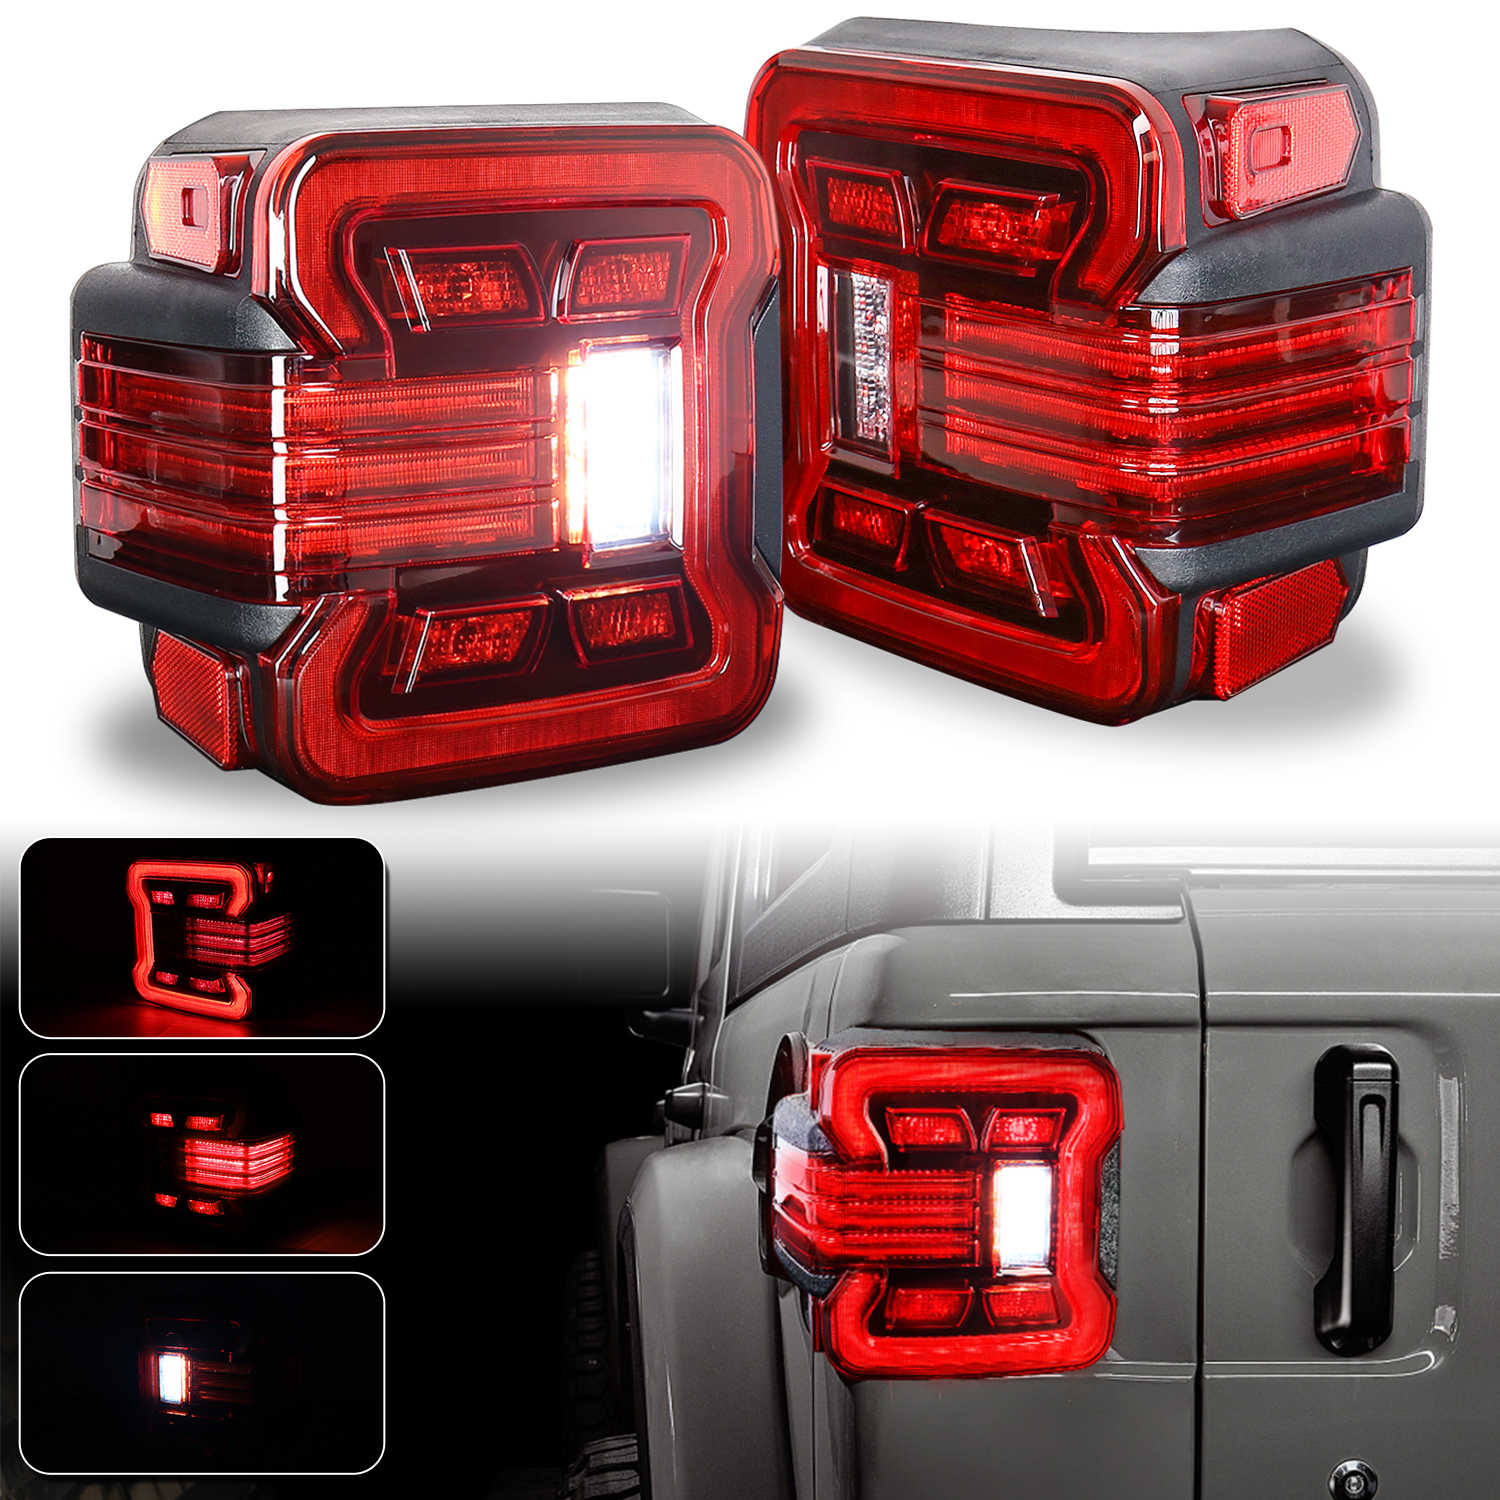 LED Tail Lights, DOT Approved JL Tail Lights for 2018-2022 Jeep Wrangler JL Accessories with Running Reverse Brake Turn Signal Light, Red Lens